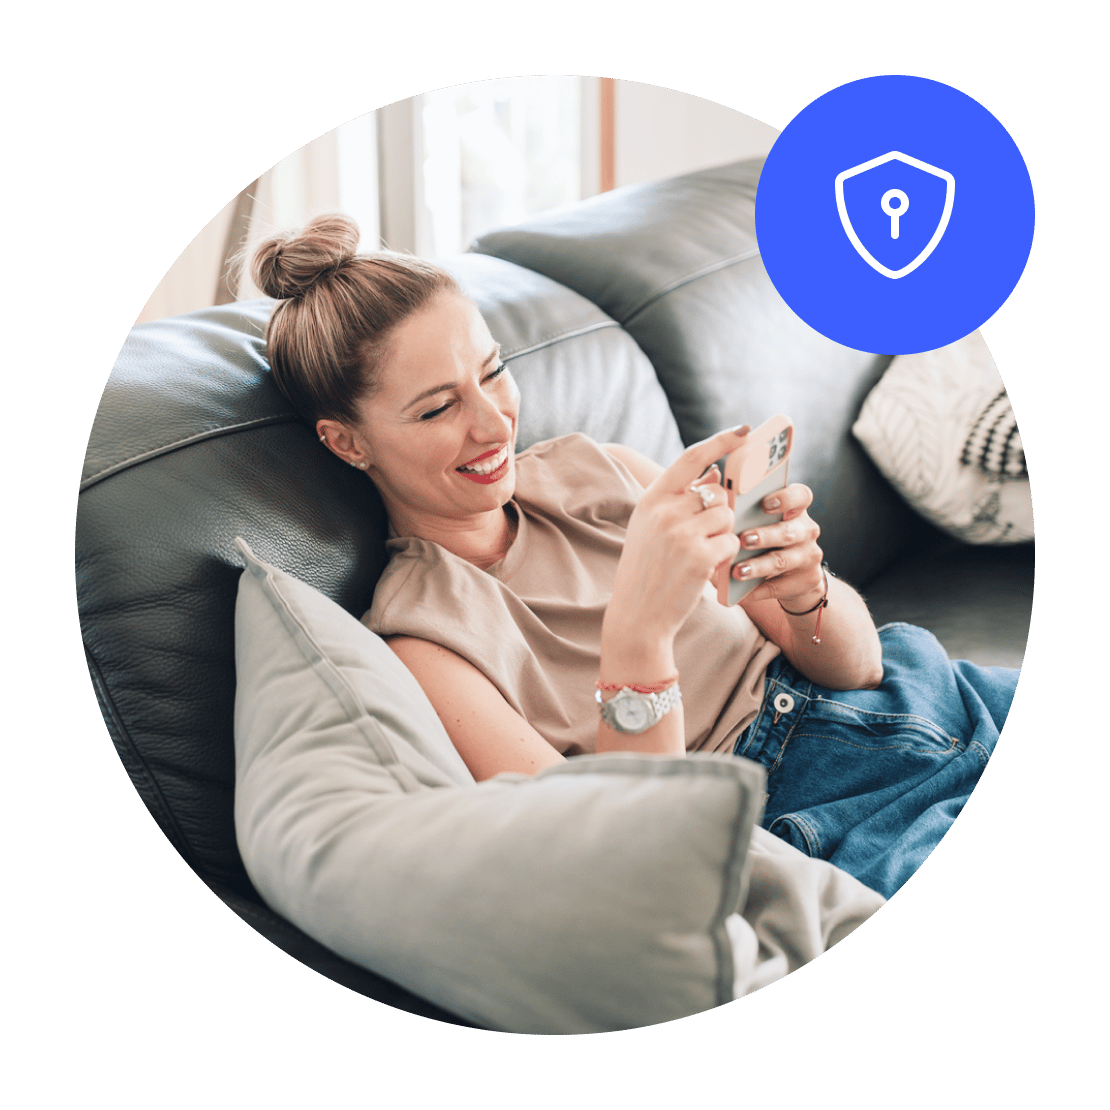 A happy woman uses NordVPN for secure website access.